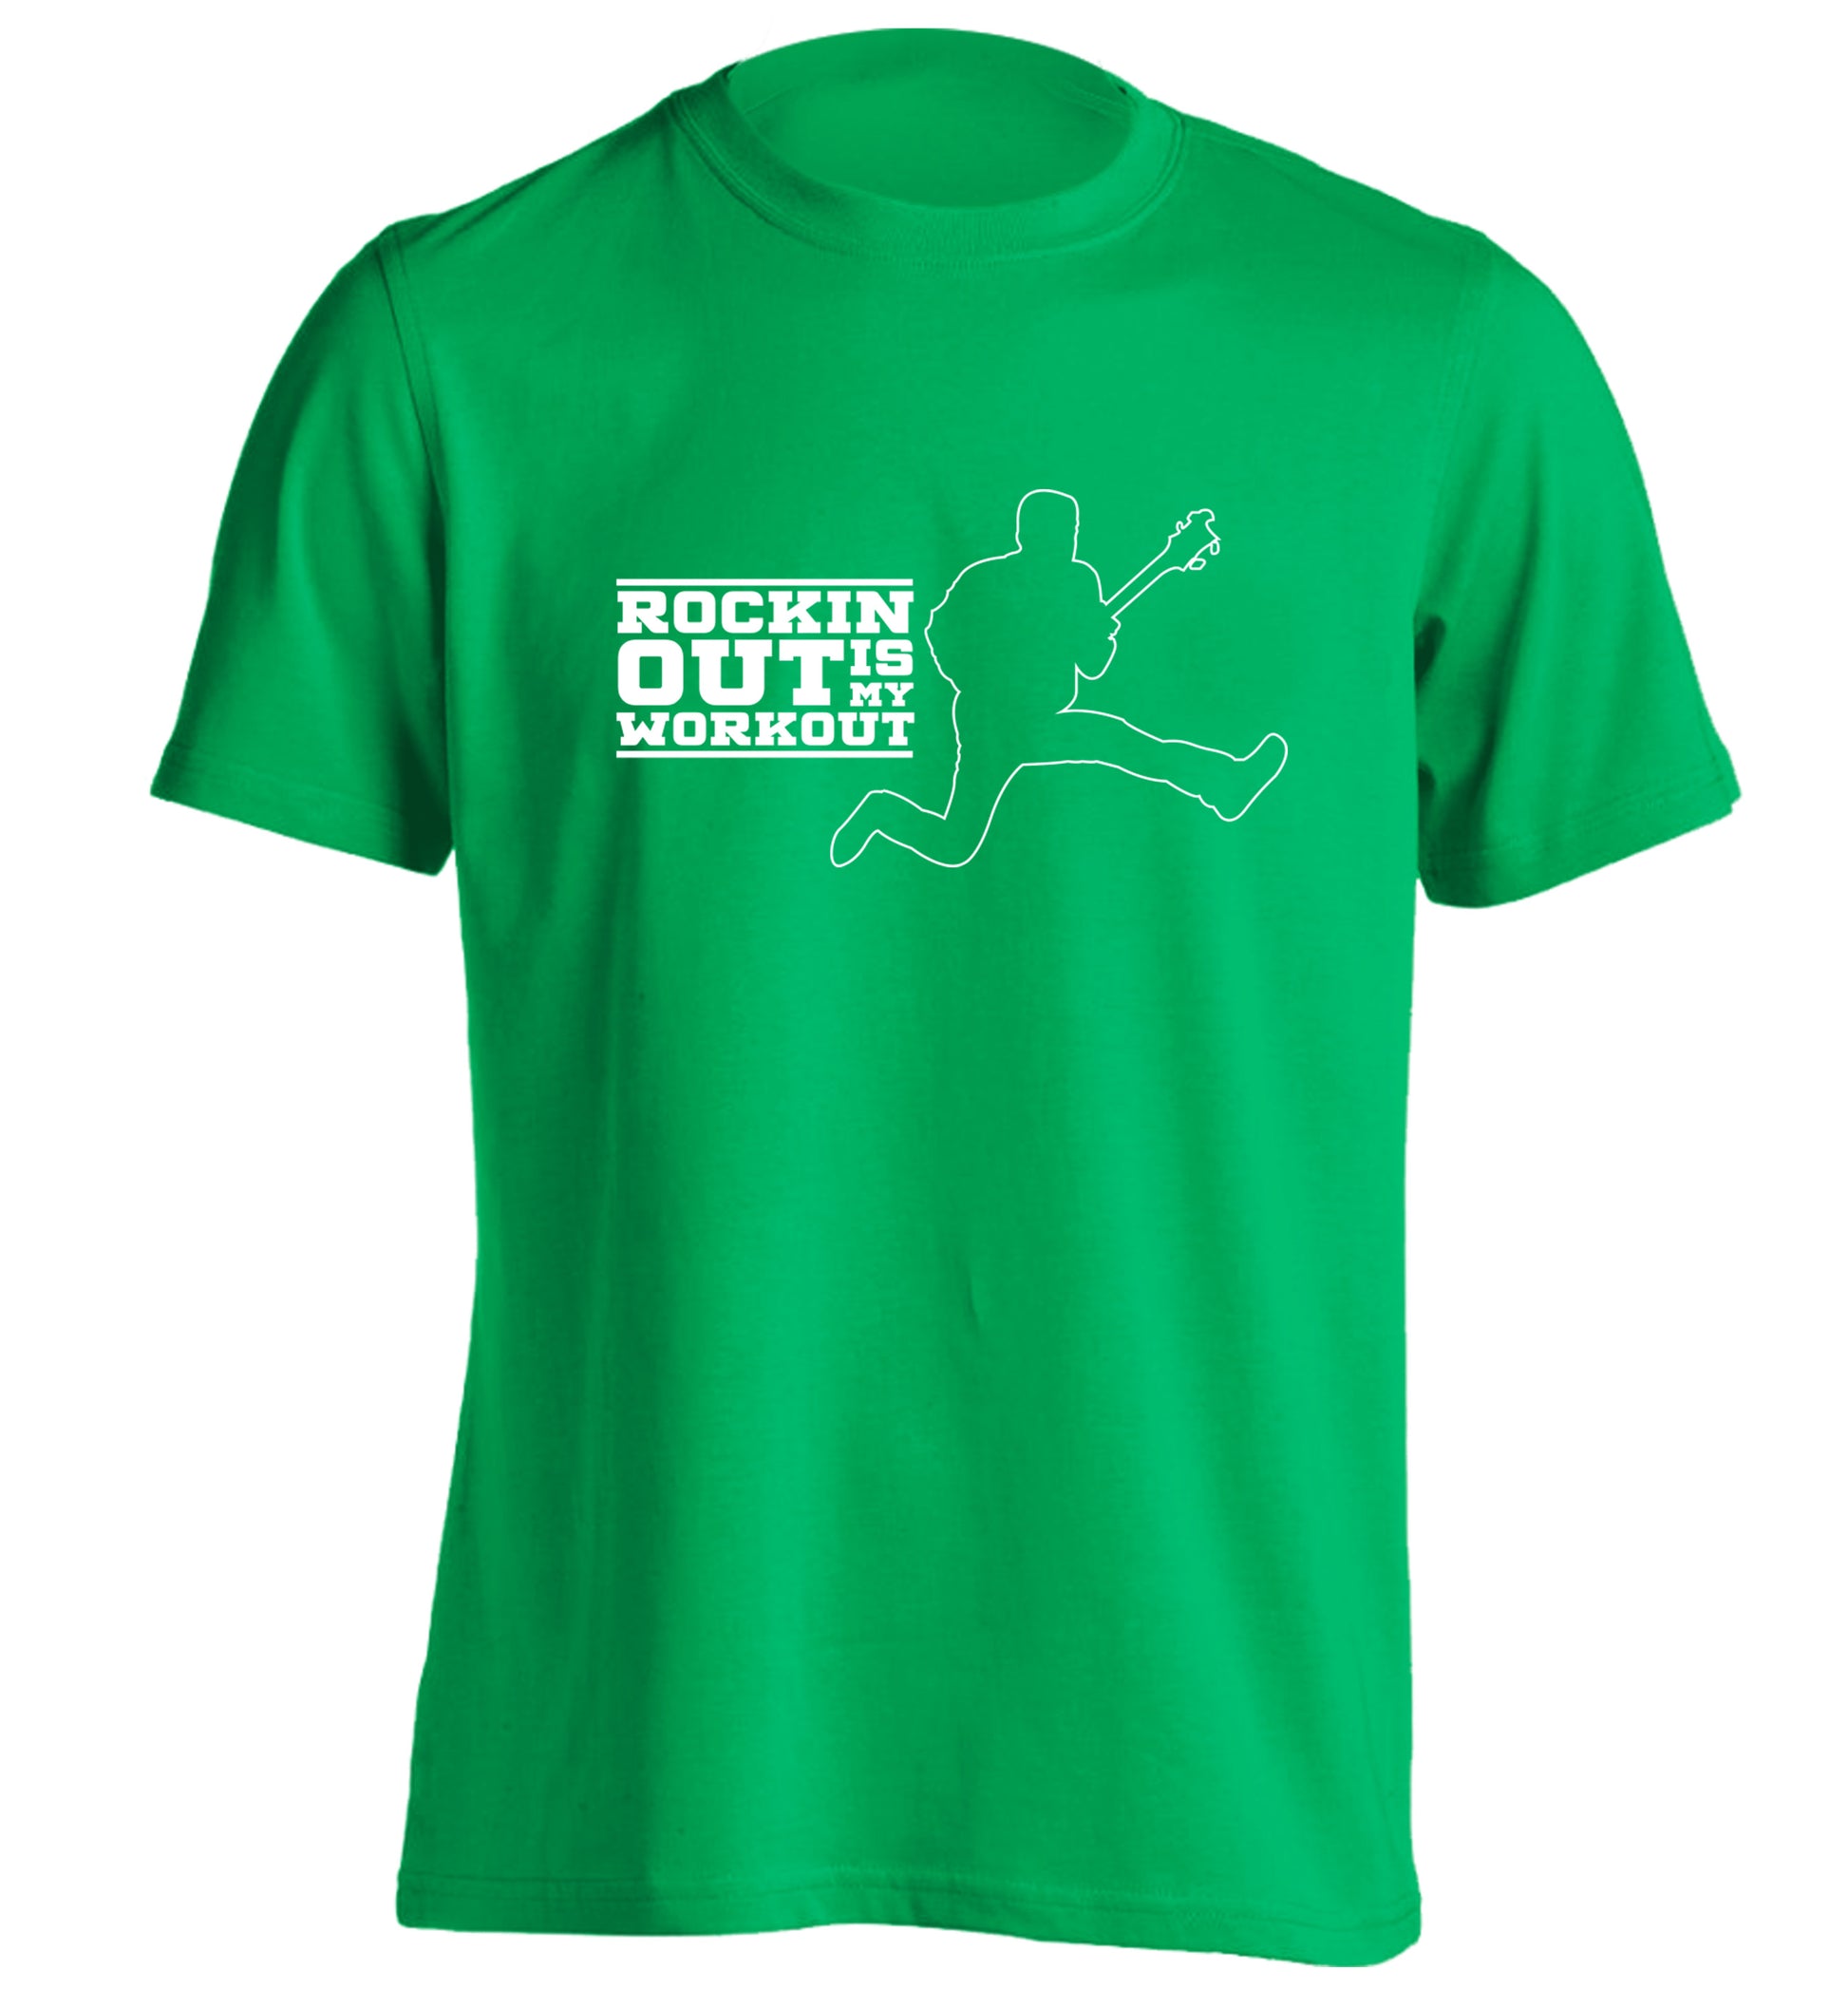 Rockin out is my workout adults unisex green Tshirt 2XL